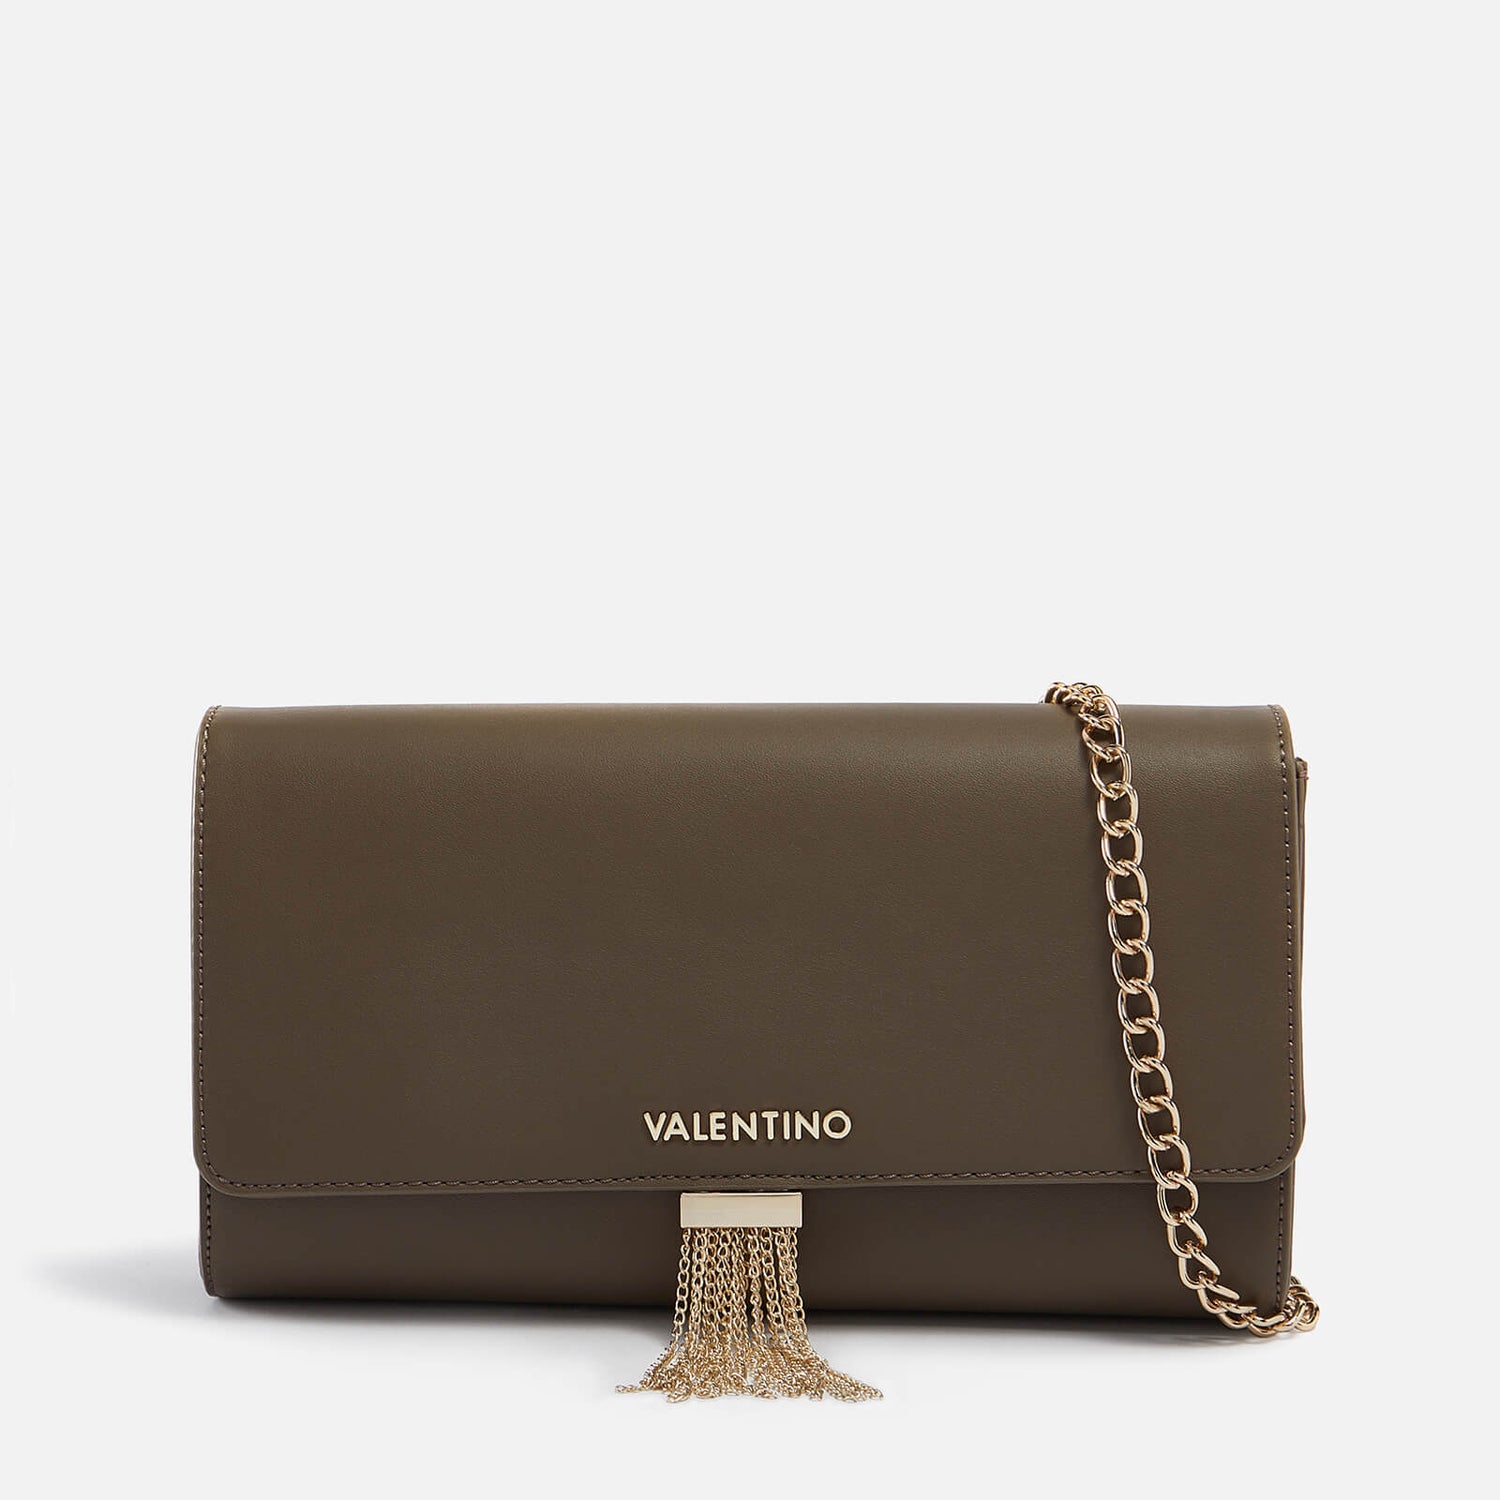 Valentino Bags Women's Piccadilly Large Shoulder Bag - Taupe